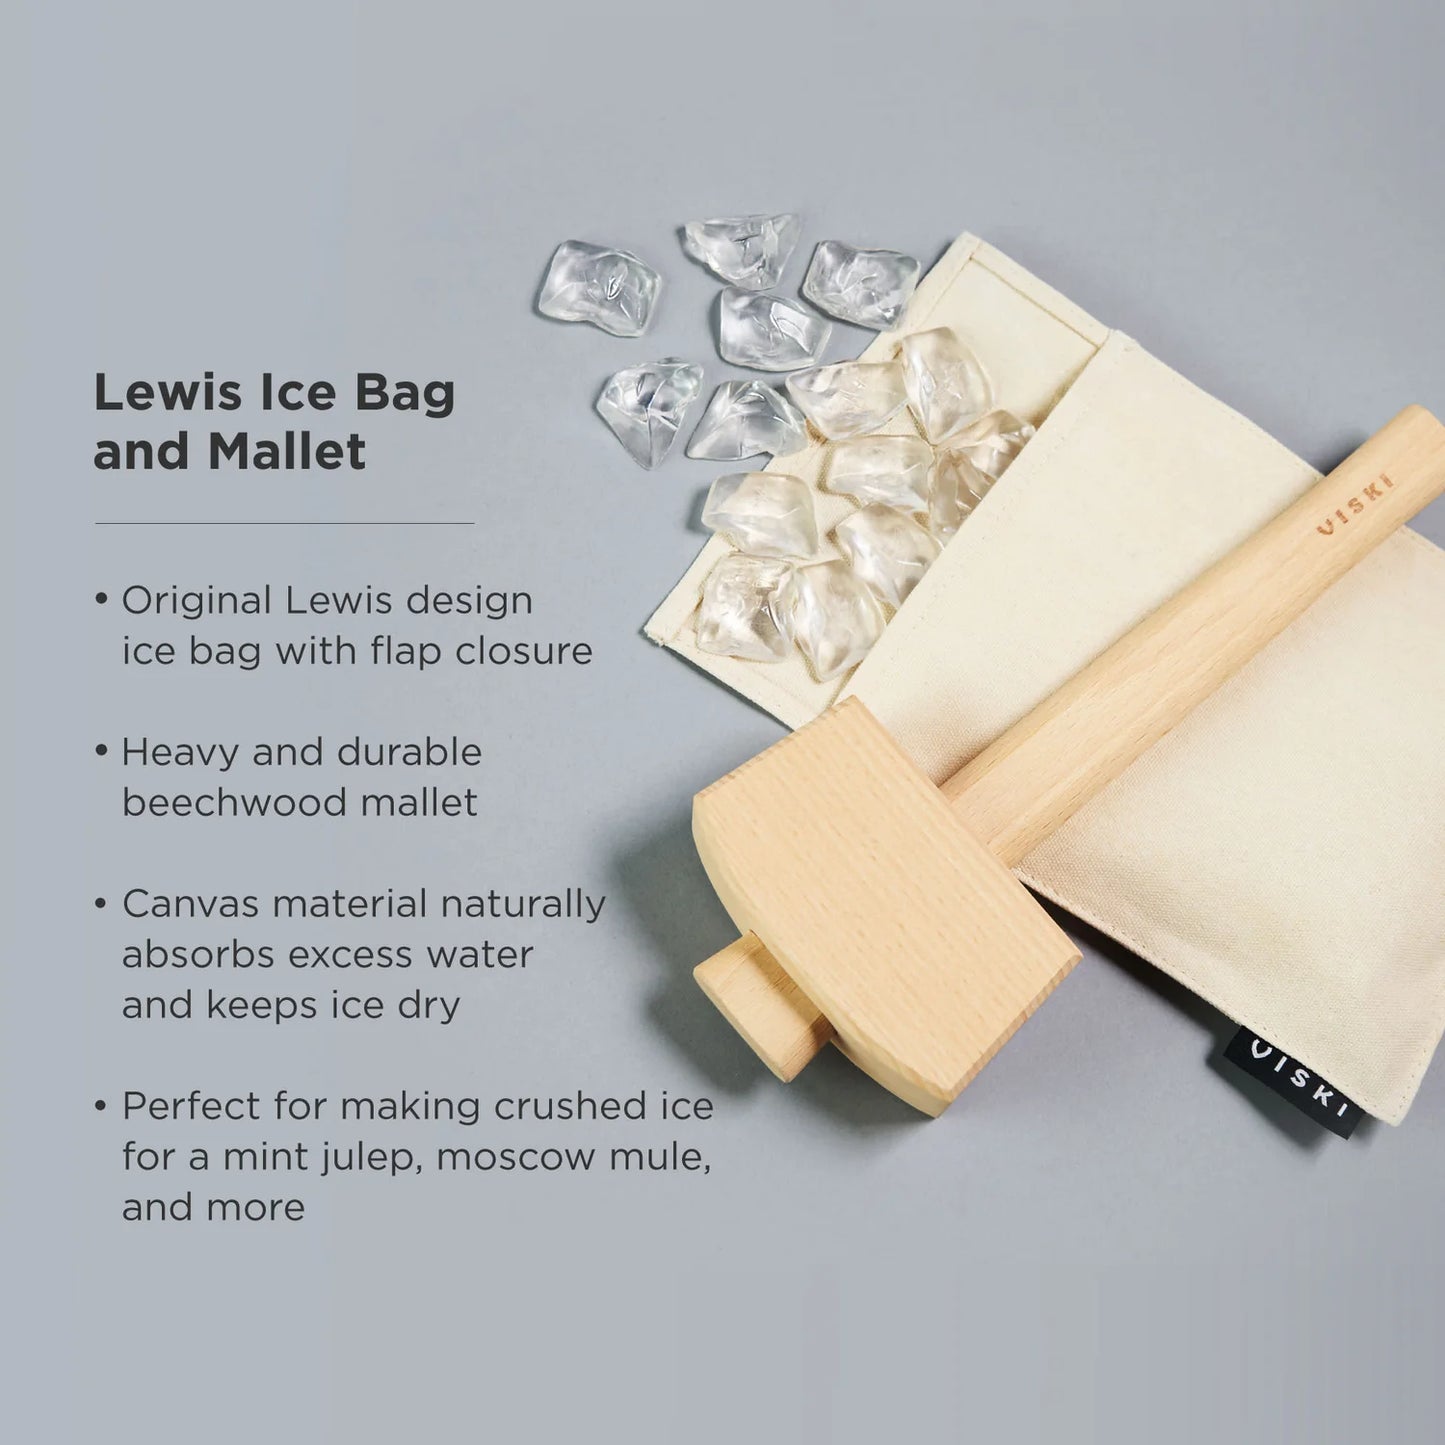 Lewis Ice Bag and Mallet